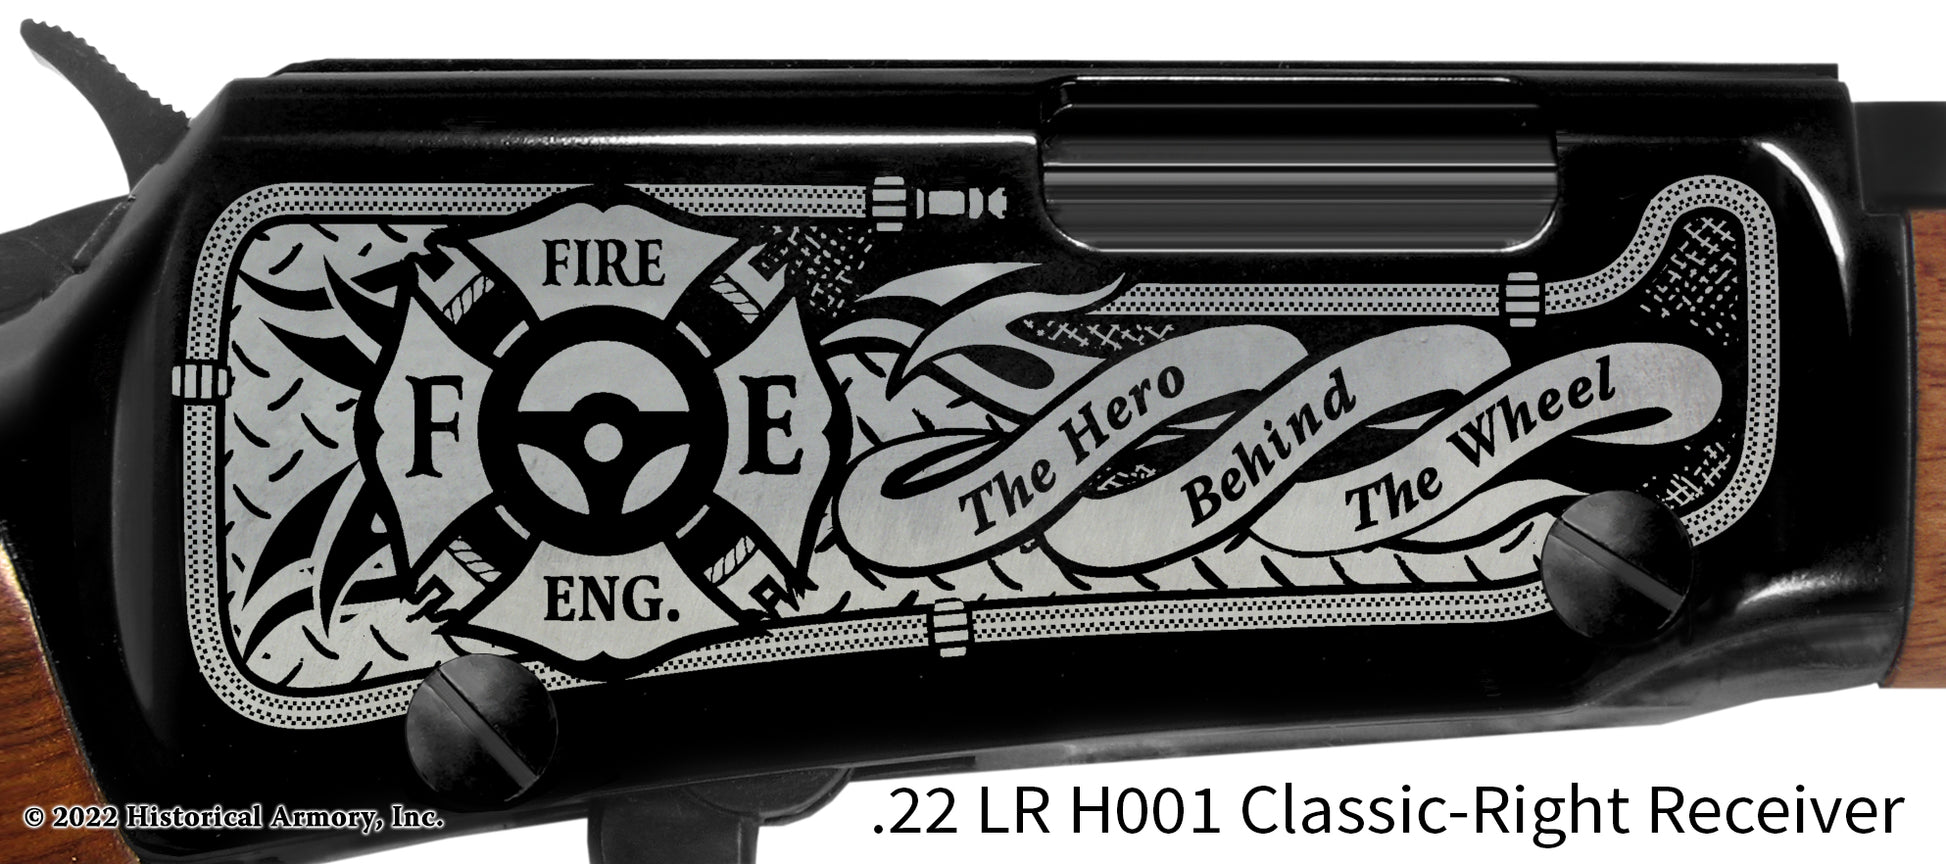 Firefighter Engineer The Hero Behind the Wheel Engraved Rifle